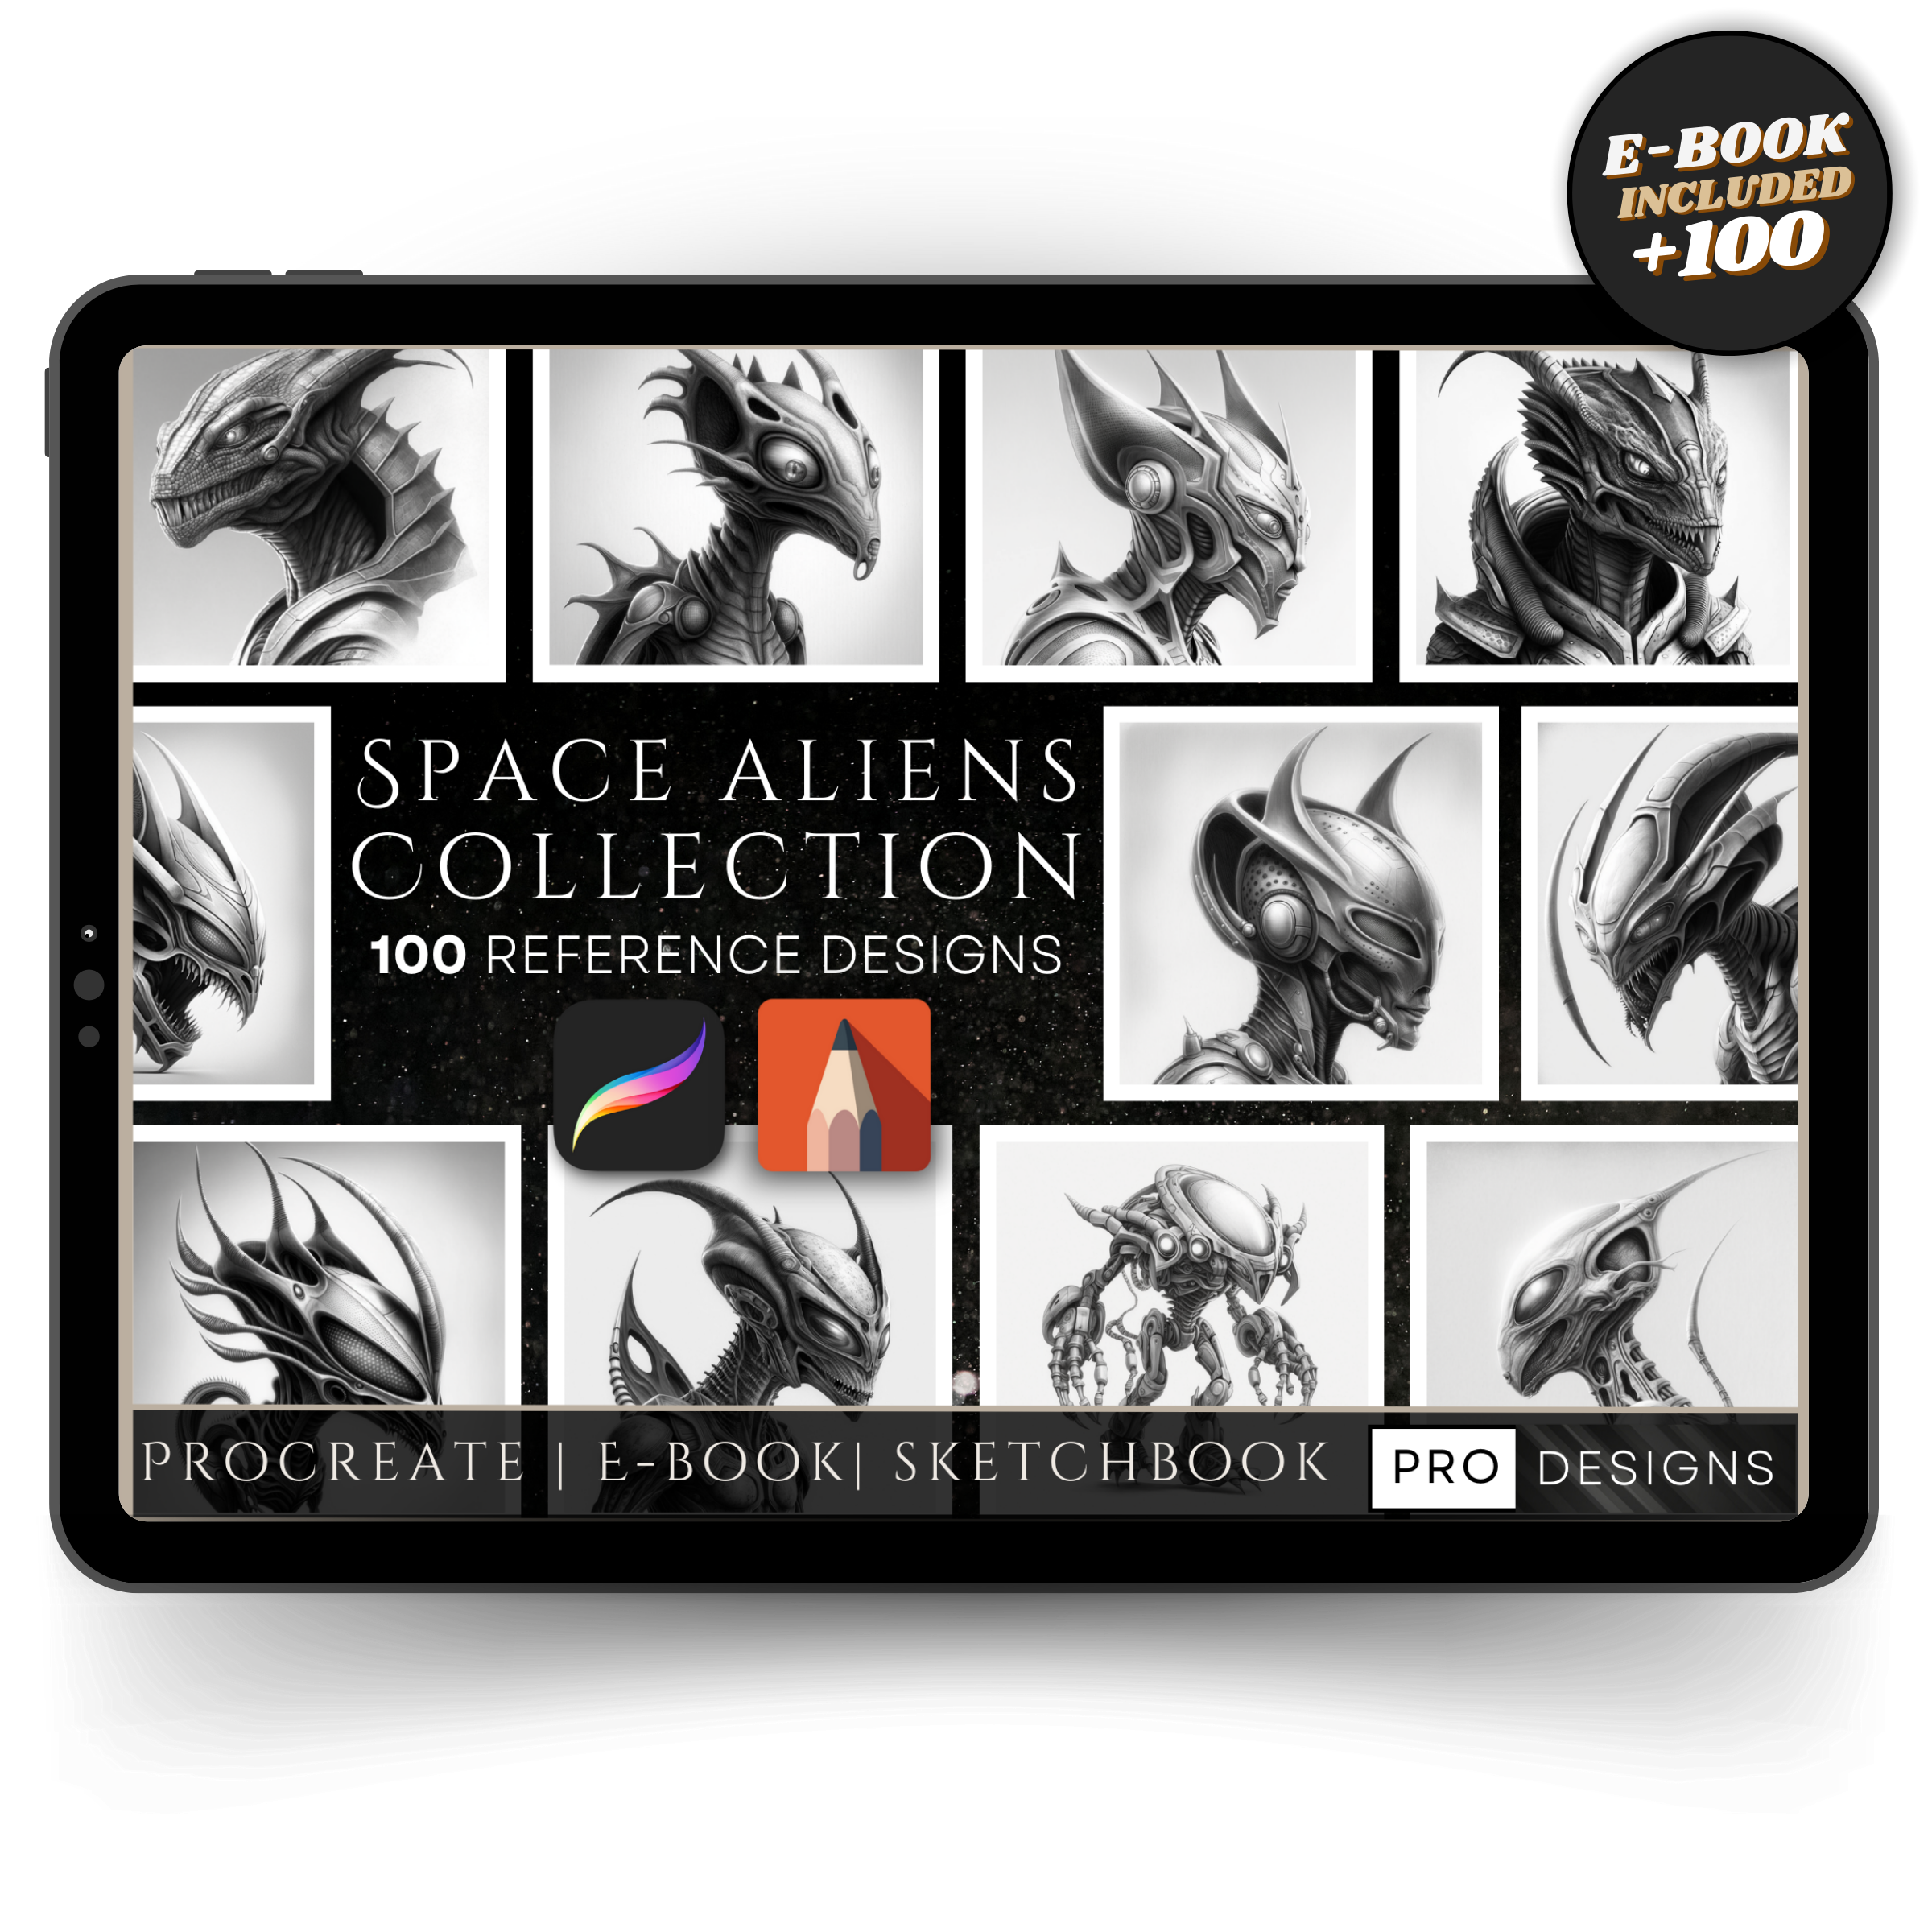 "Cosmic Encounters" - The Space Alien Collection